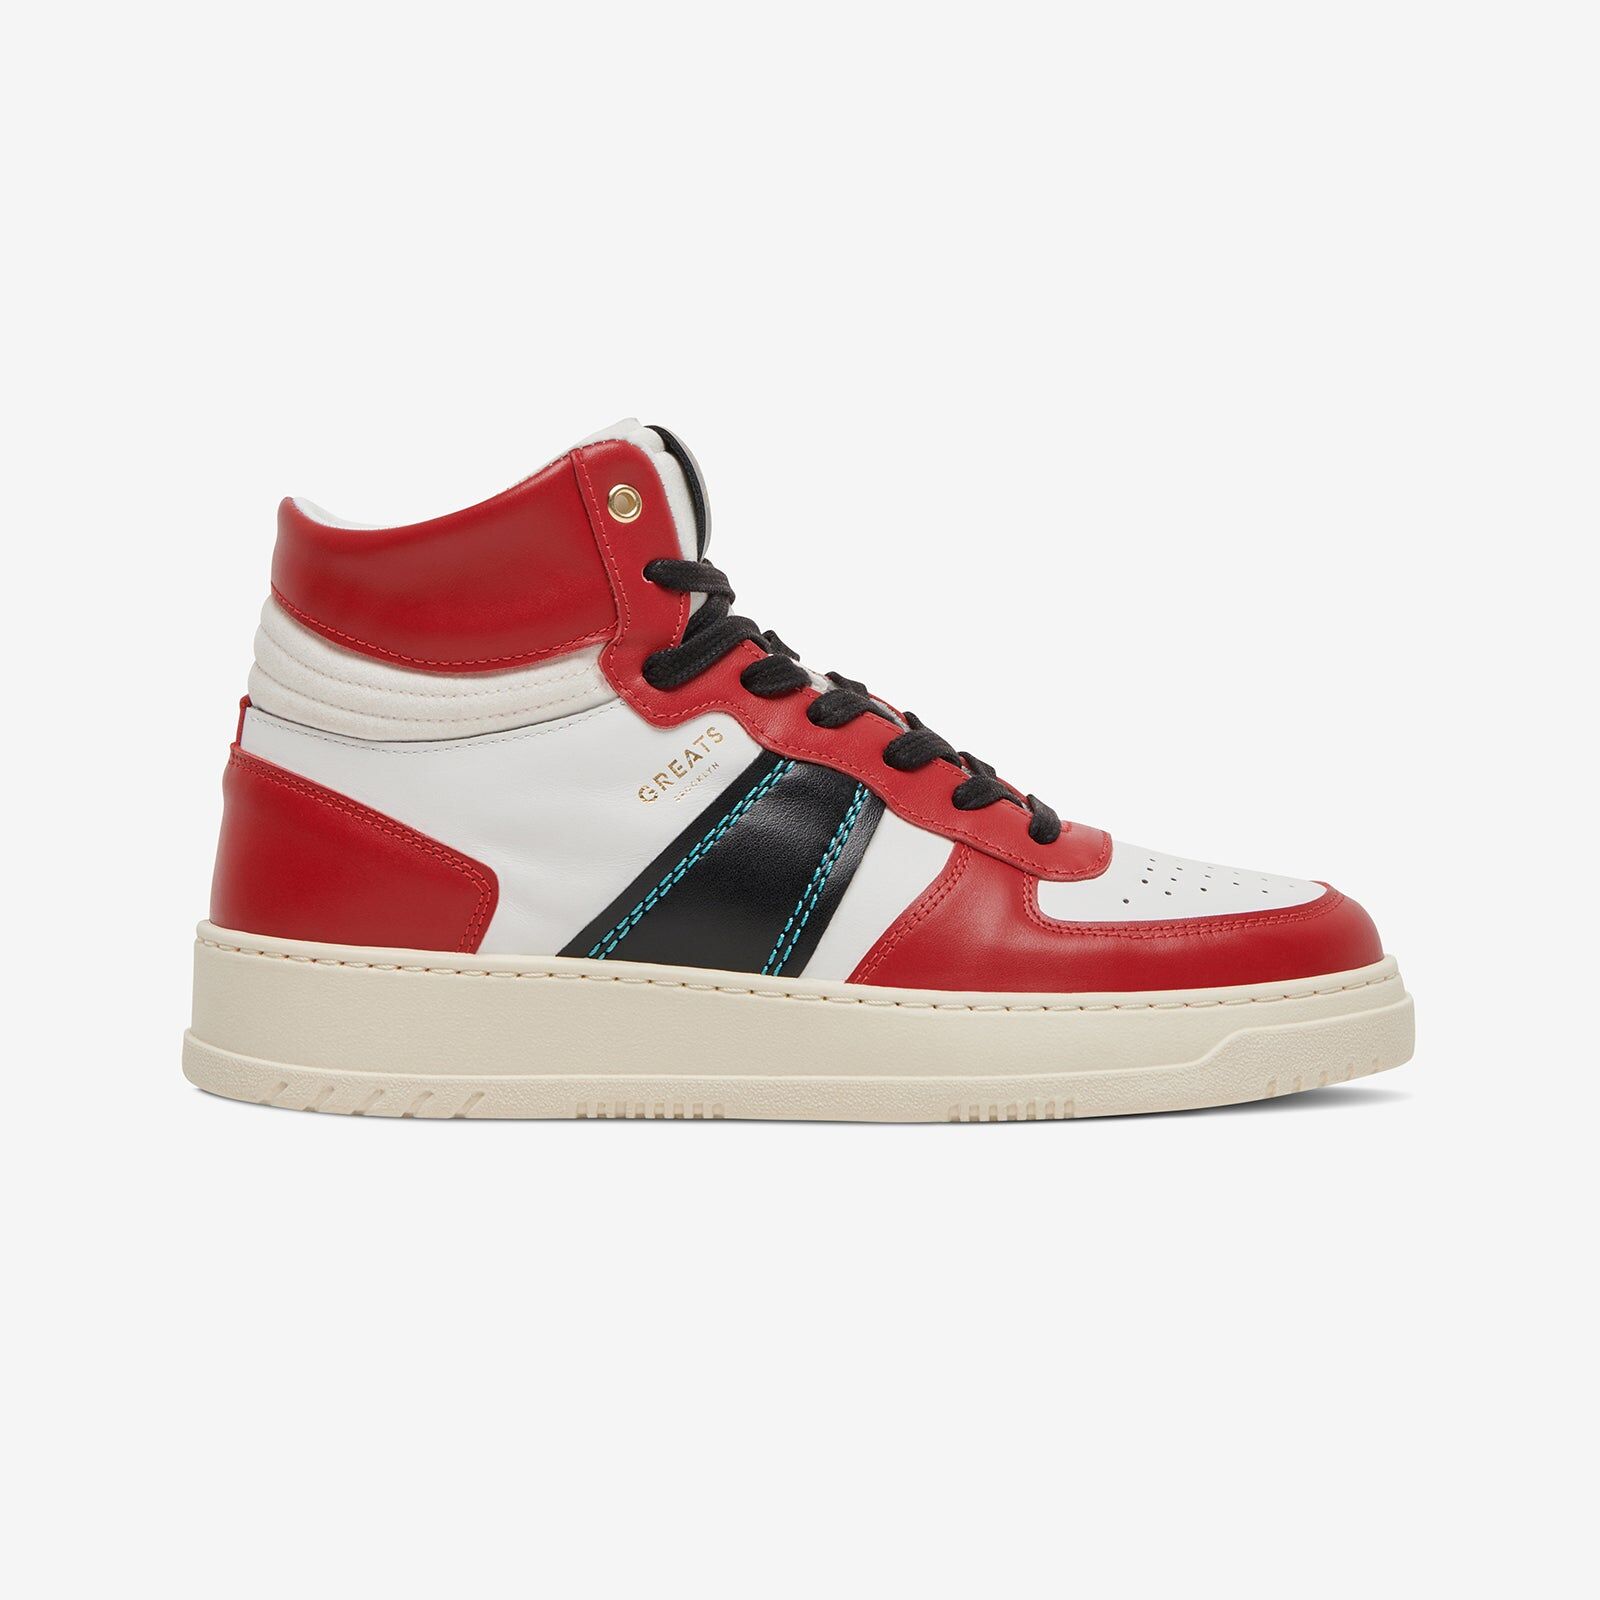 GREATS The St. James High - Retro Red/Black - male - Size: 11